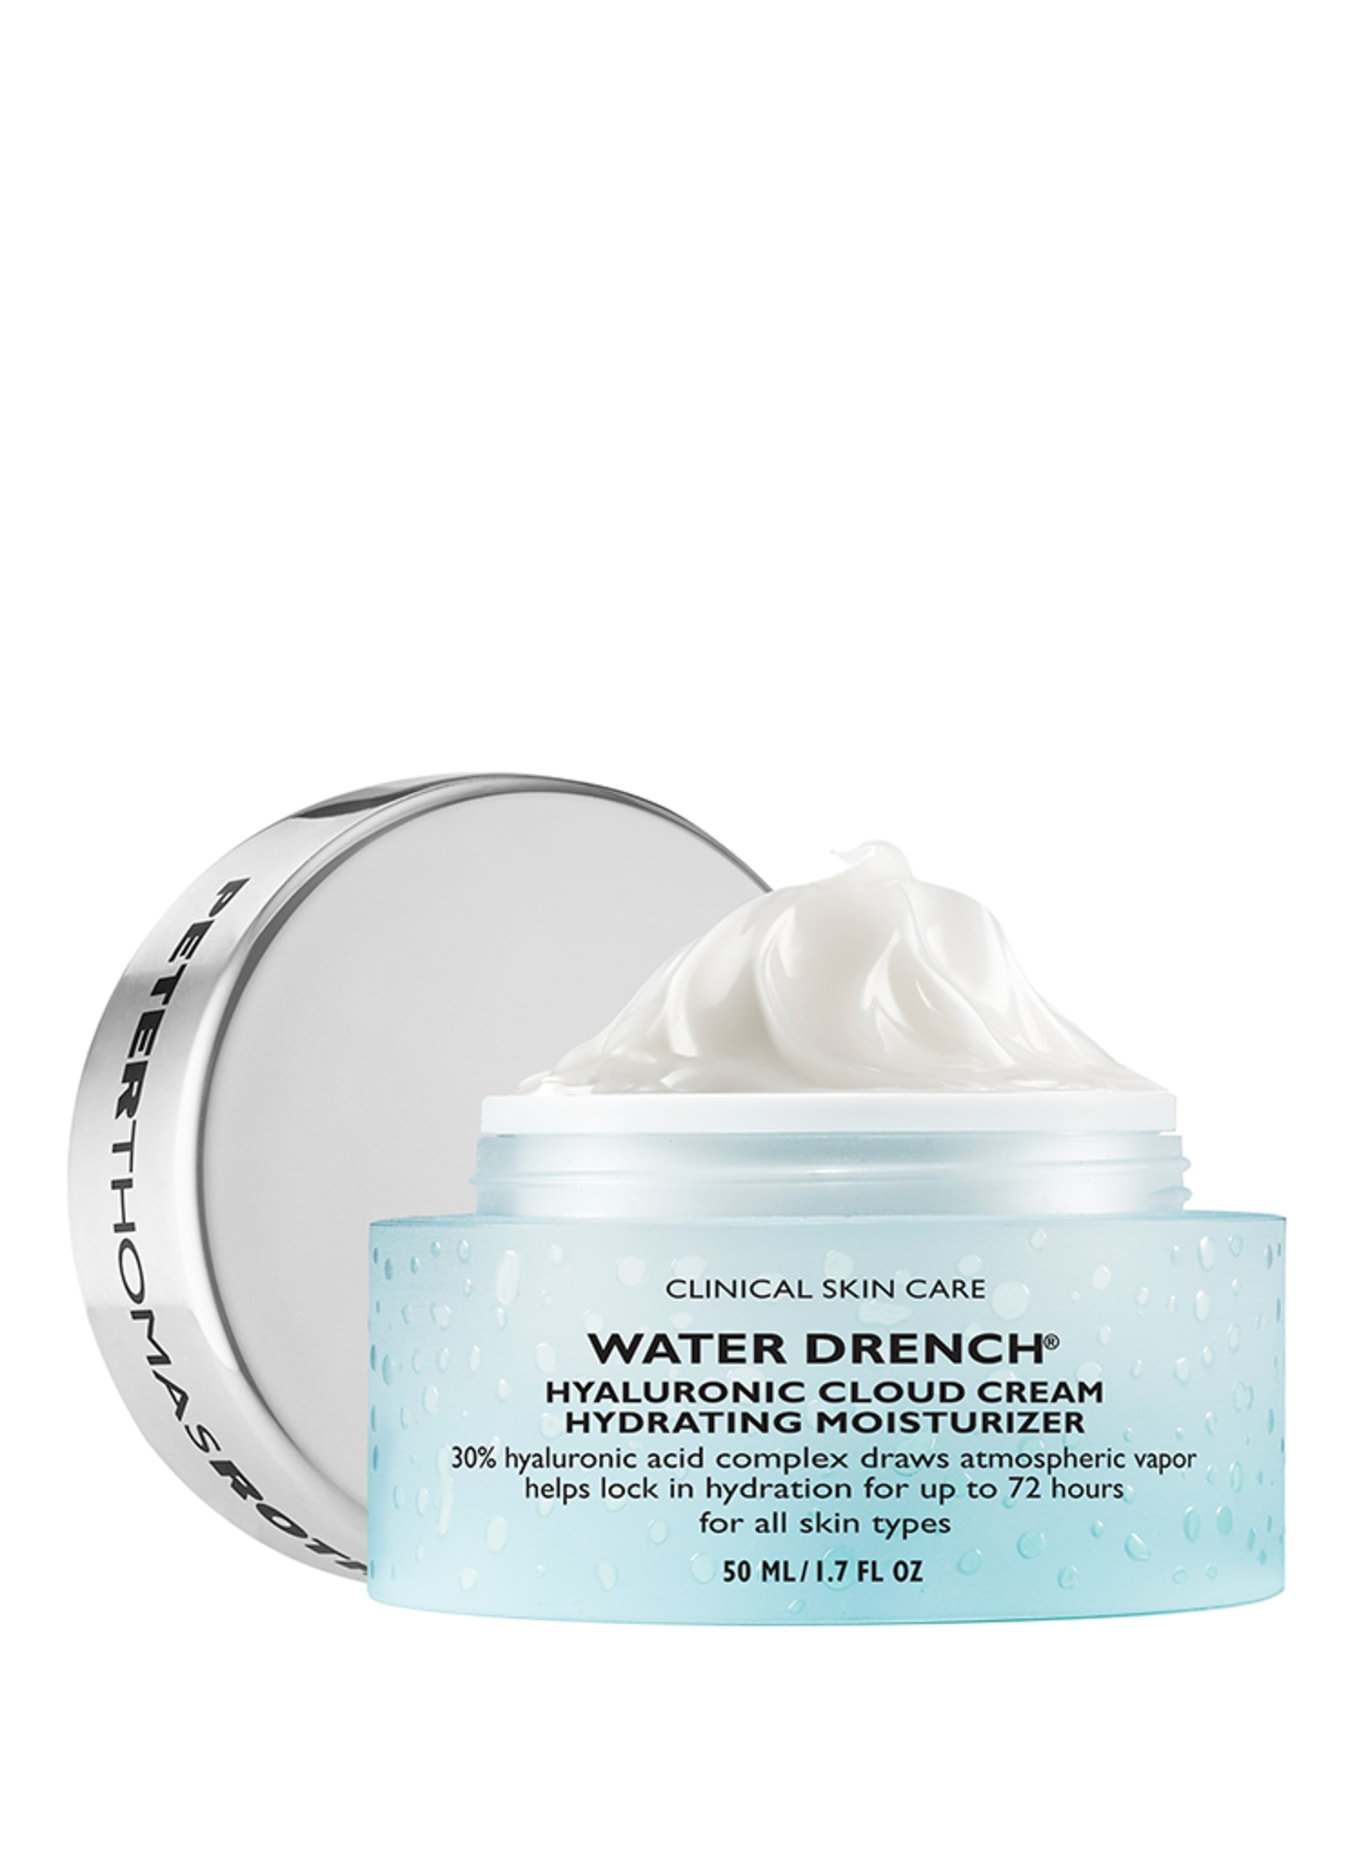 PETER THOMAS ROTH WATER DRENCH (Obrázek 2)